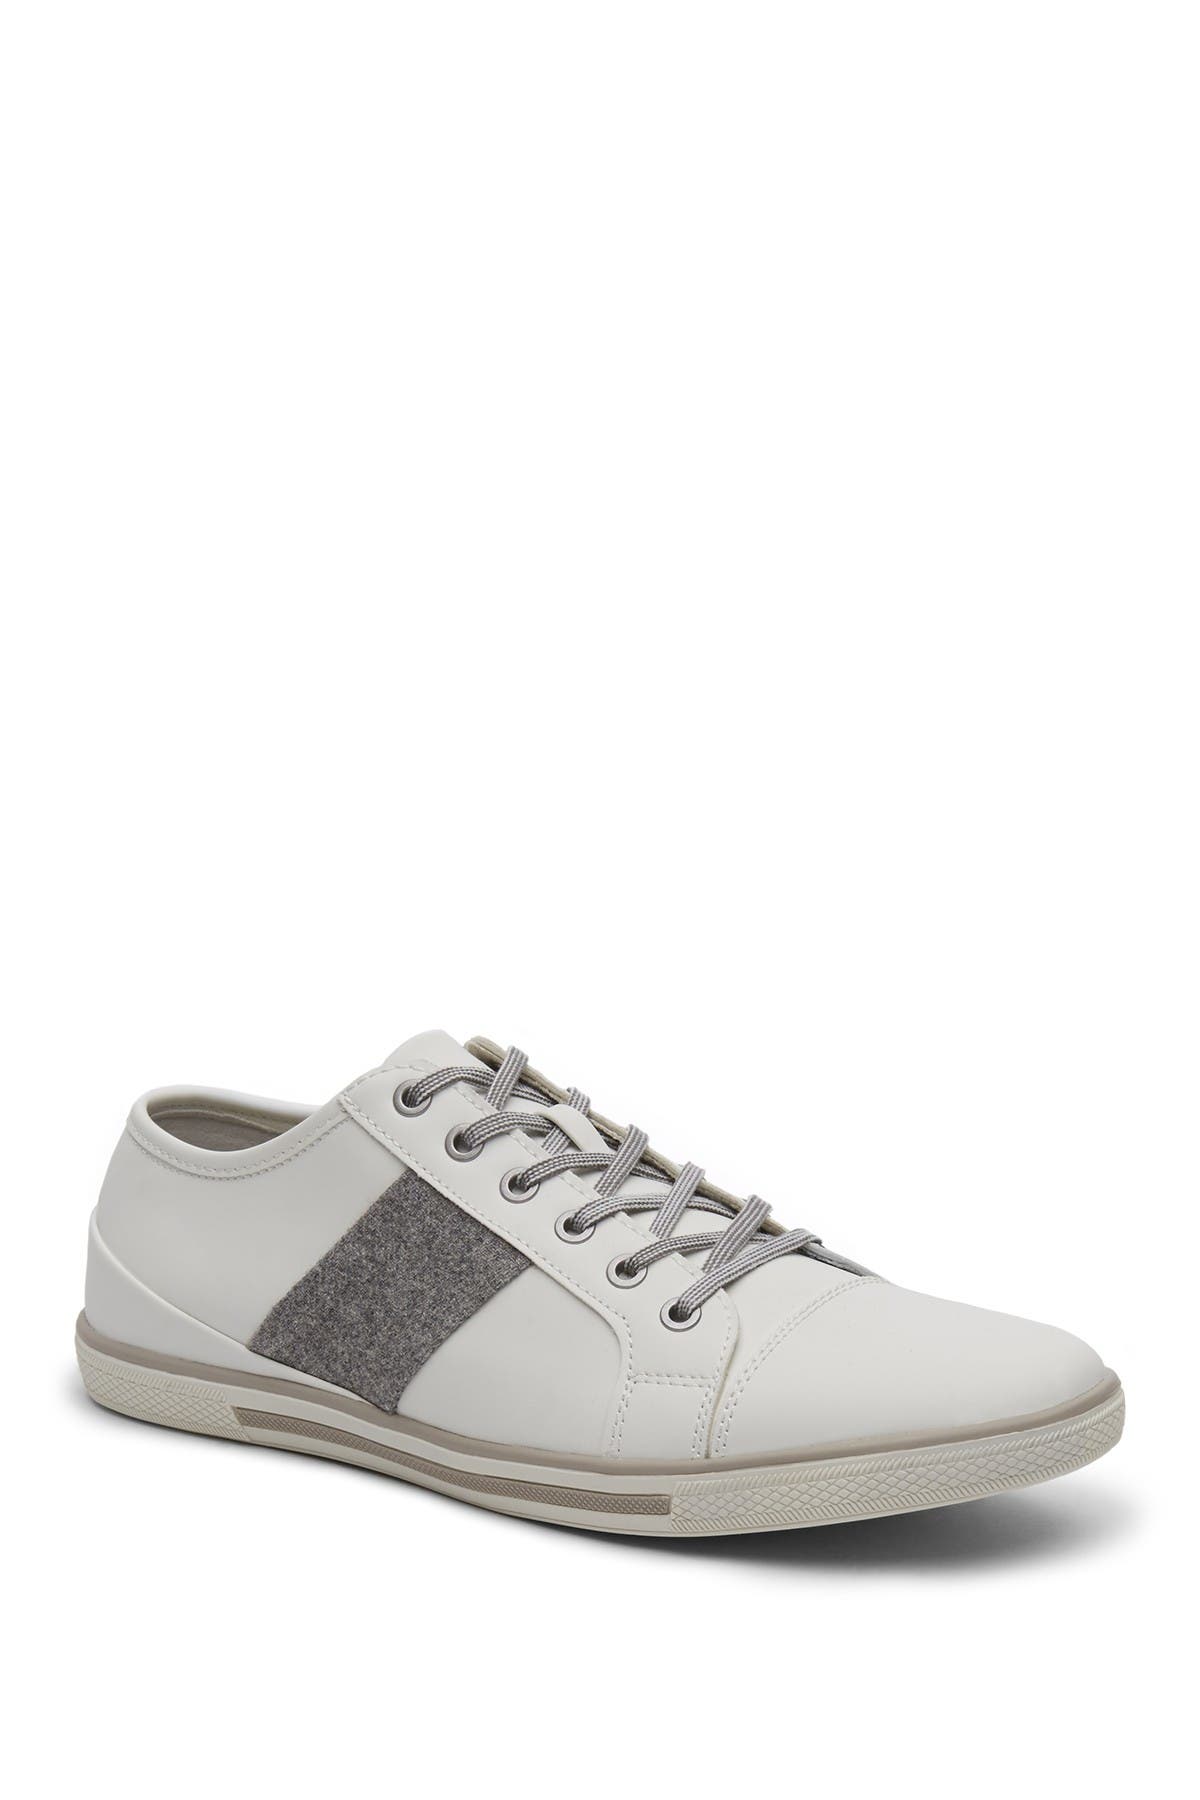 unlisted by kenneth cole men's crown sneaker